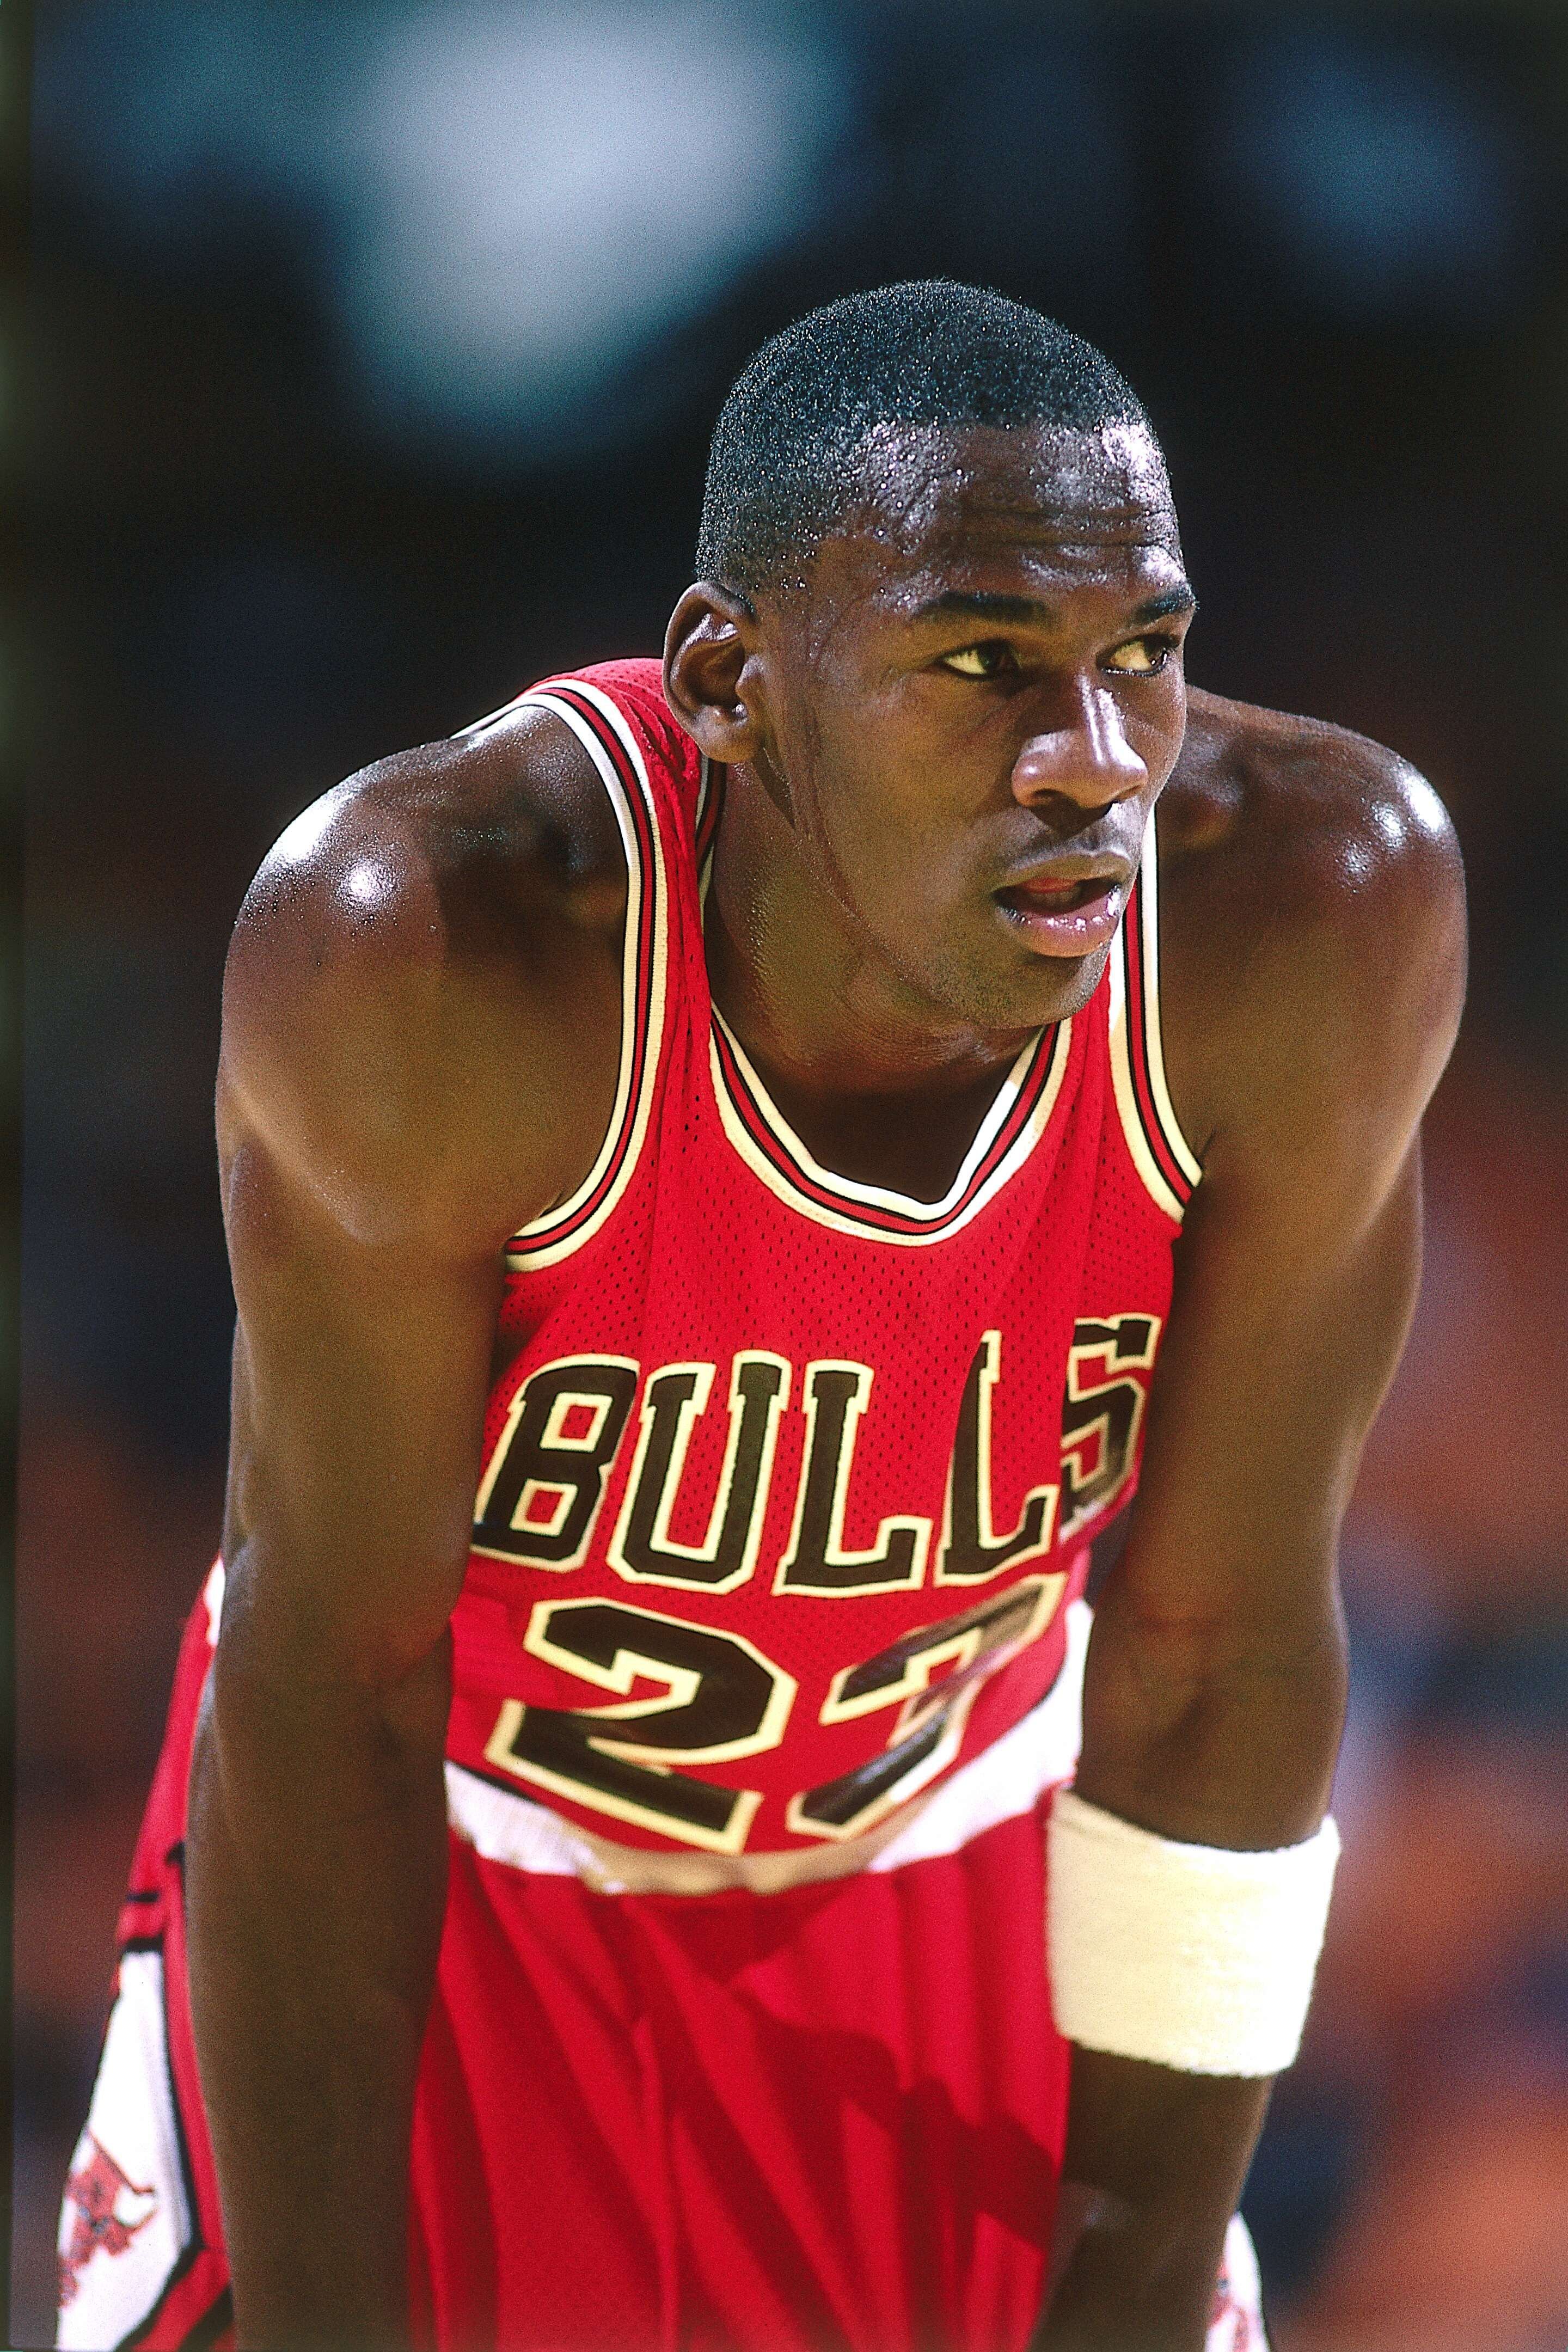 Michael Jordan Played Final NBA Game 18 Years Ago — Here's a Look Back